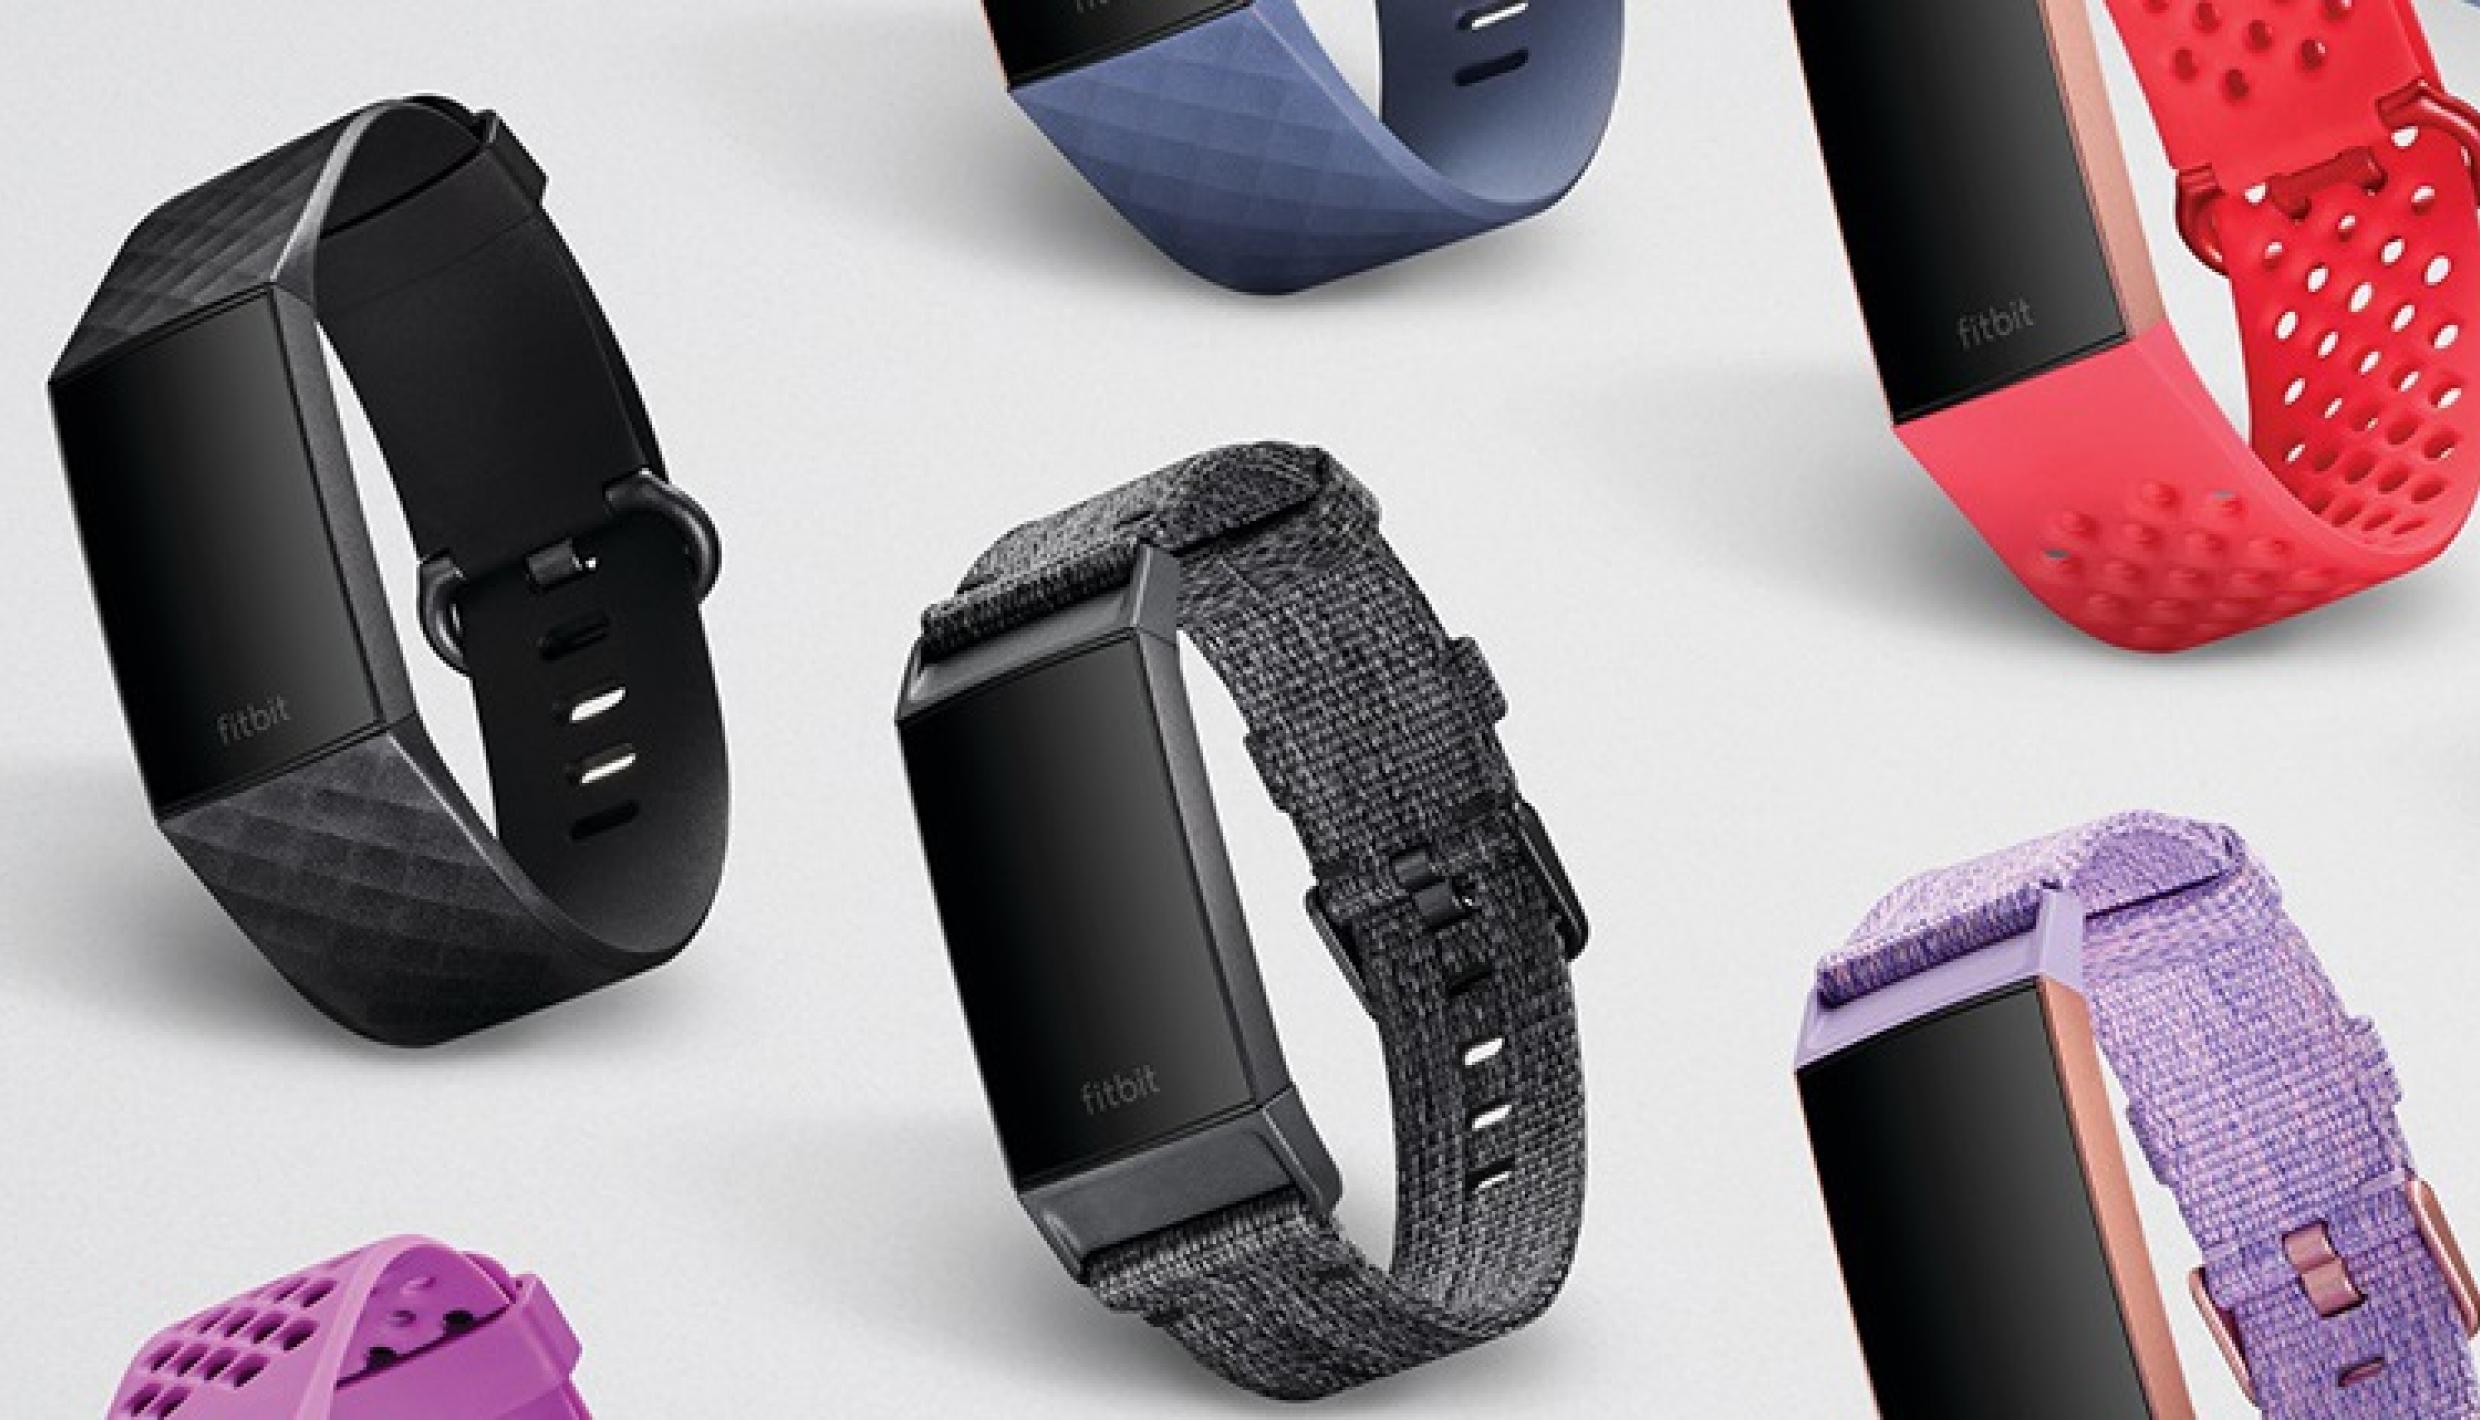 fitbit discounts for healthcare workers